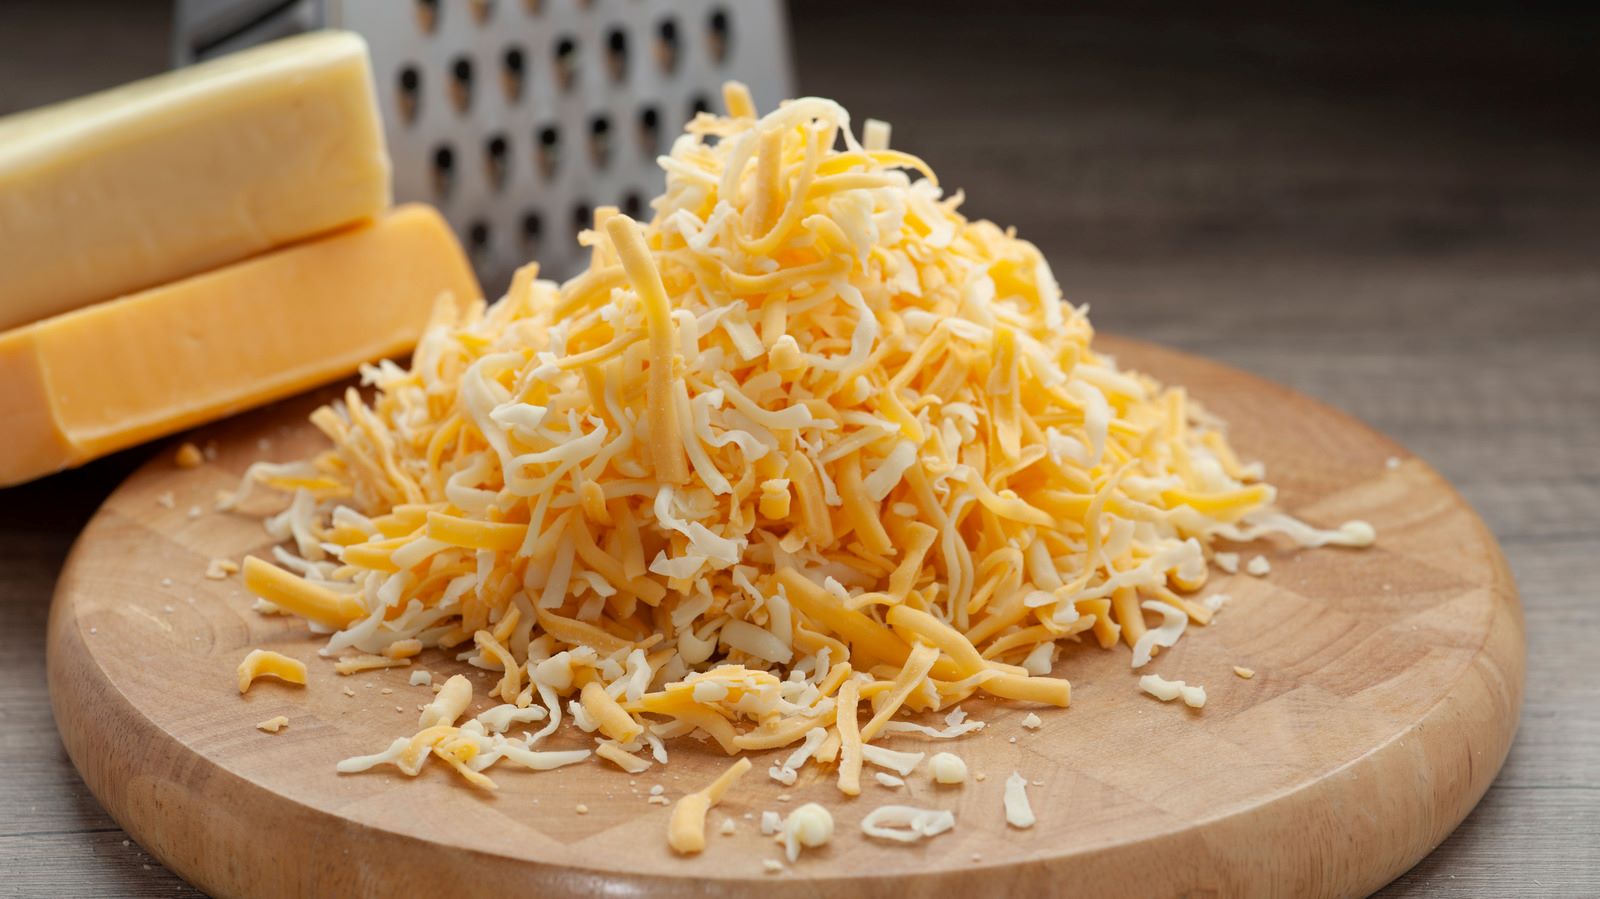 How To Store Grated Cheese